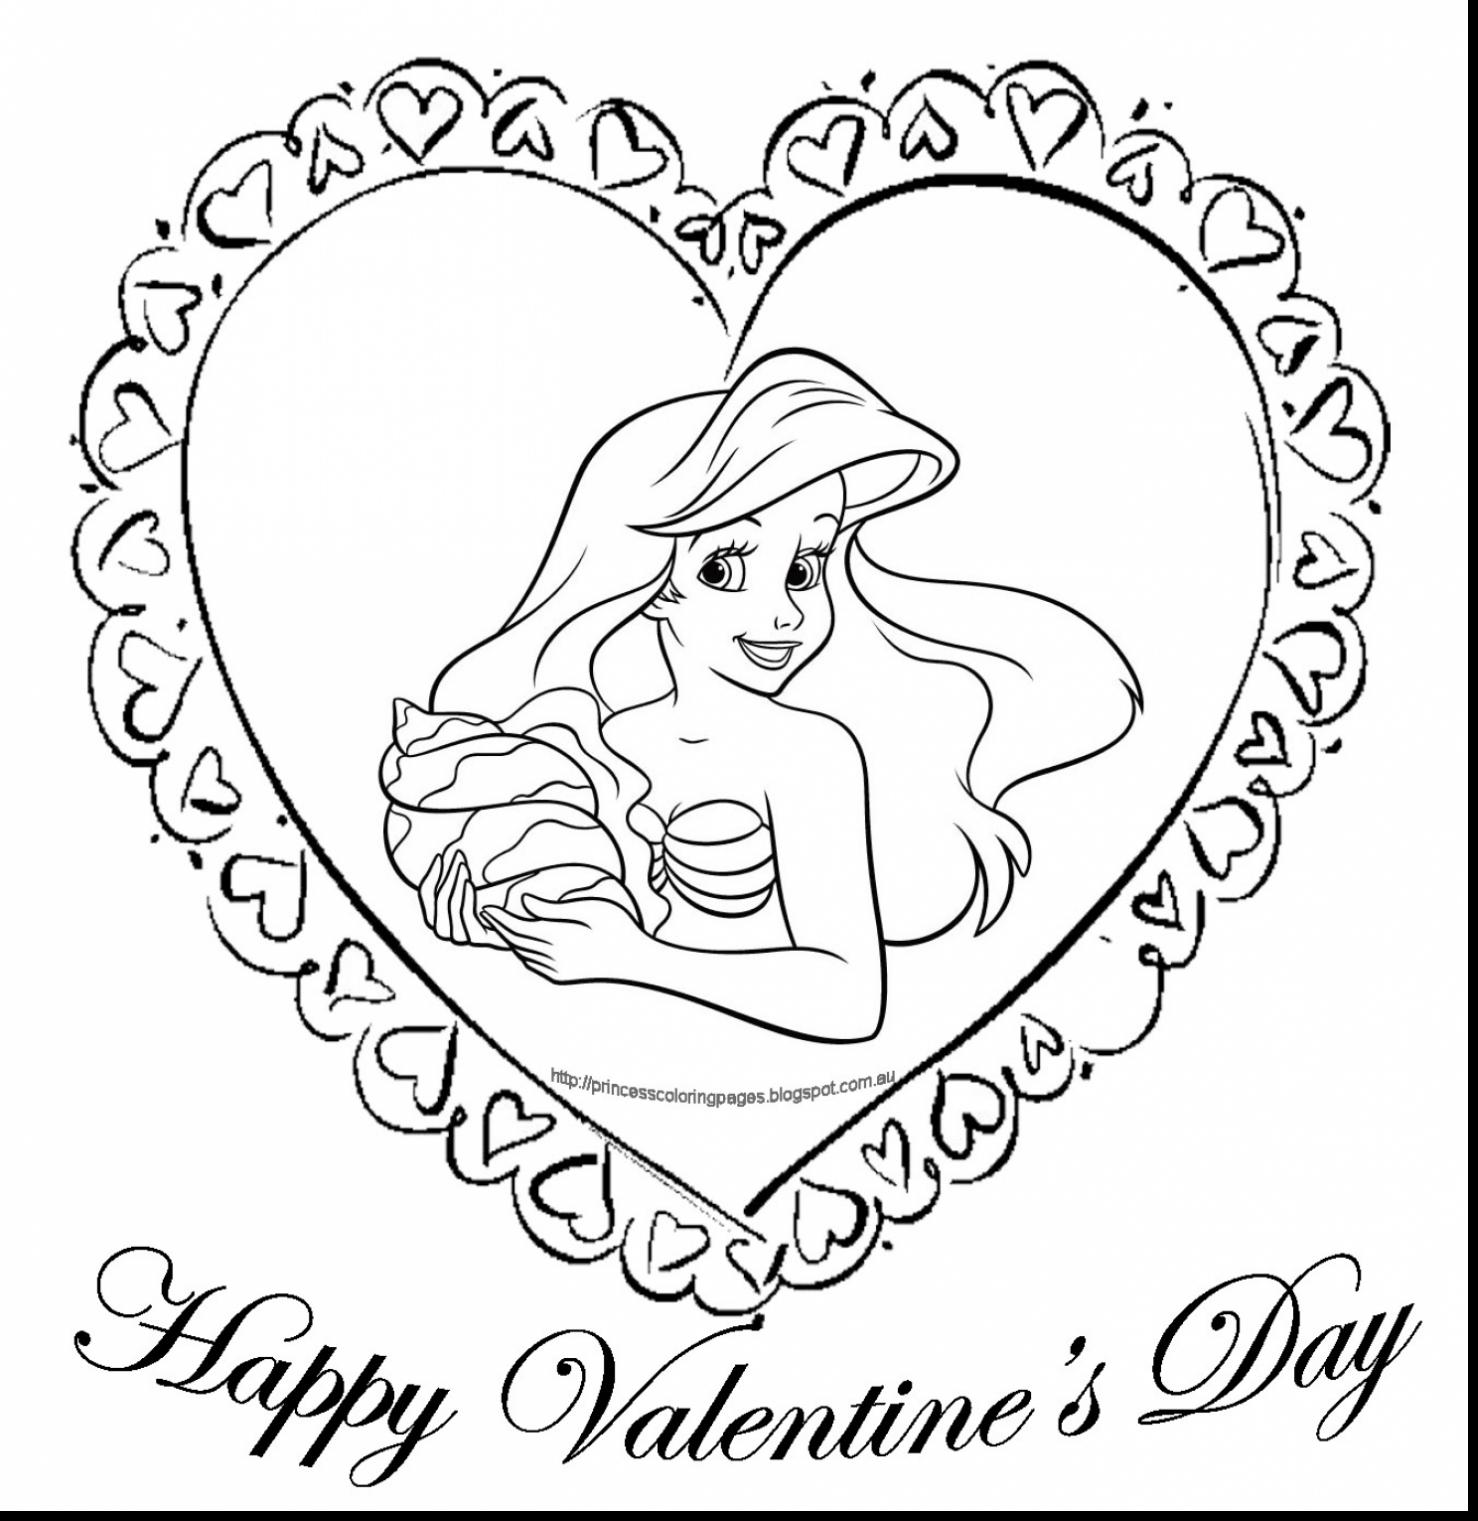 Happy Valentines Day Hearts Coloring Pages at GetDrawings ...